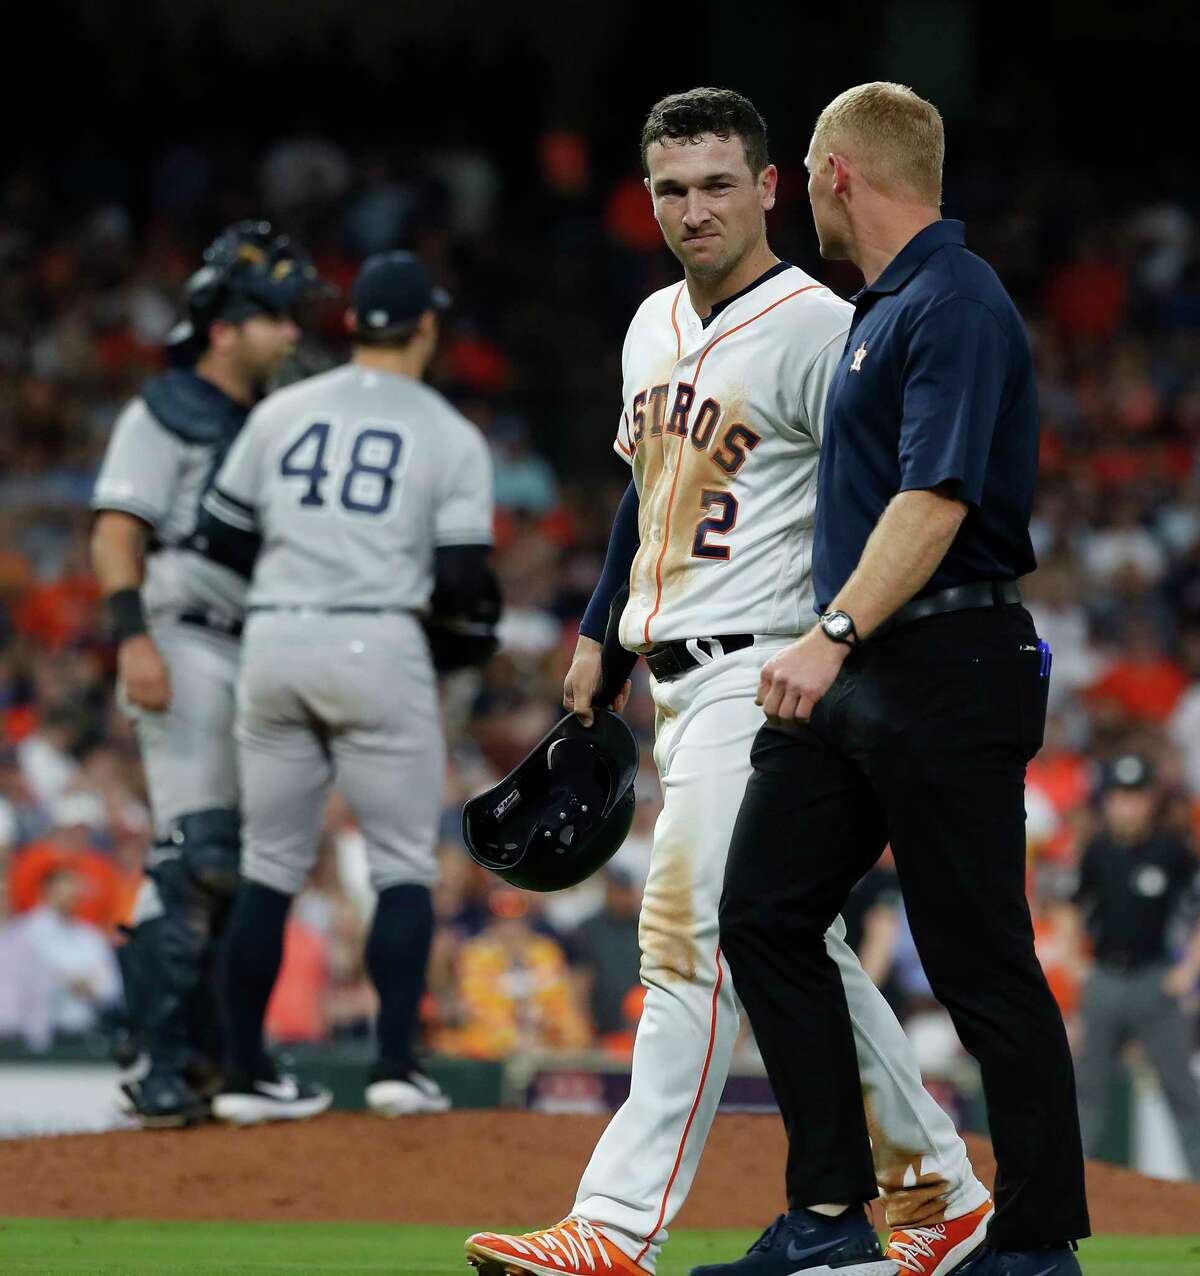 PHOTOS: Alex Bregman's best moments on and off the field Houston Astros Alex Bregman (2) comes out of the game with a hamstring injury after taking second base on a defensive indifference during the eighth inning of an MLB game at Minute Maid Park, Tuesday, April 9, 2019, in Houston.